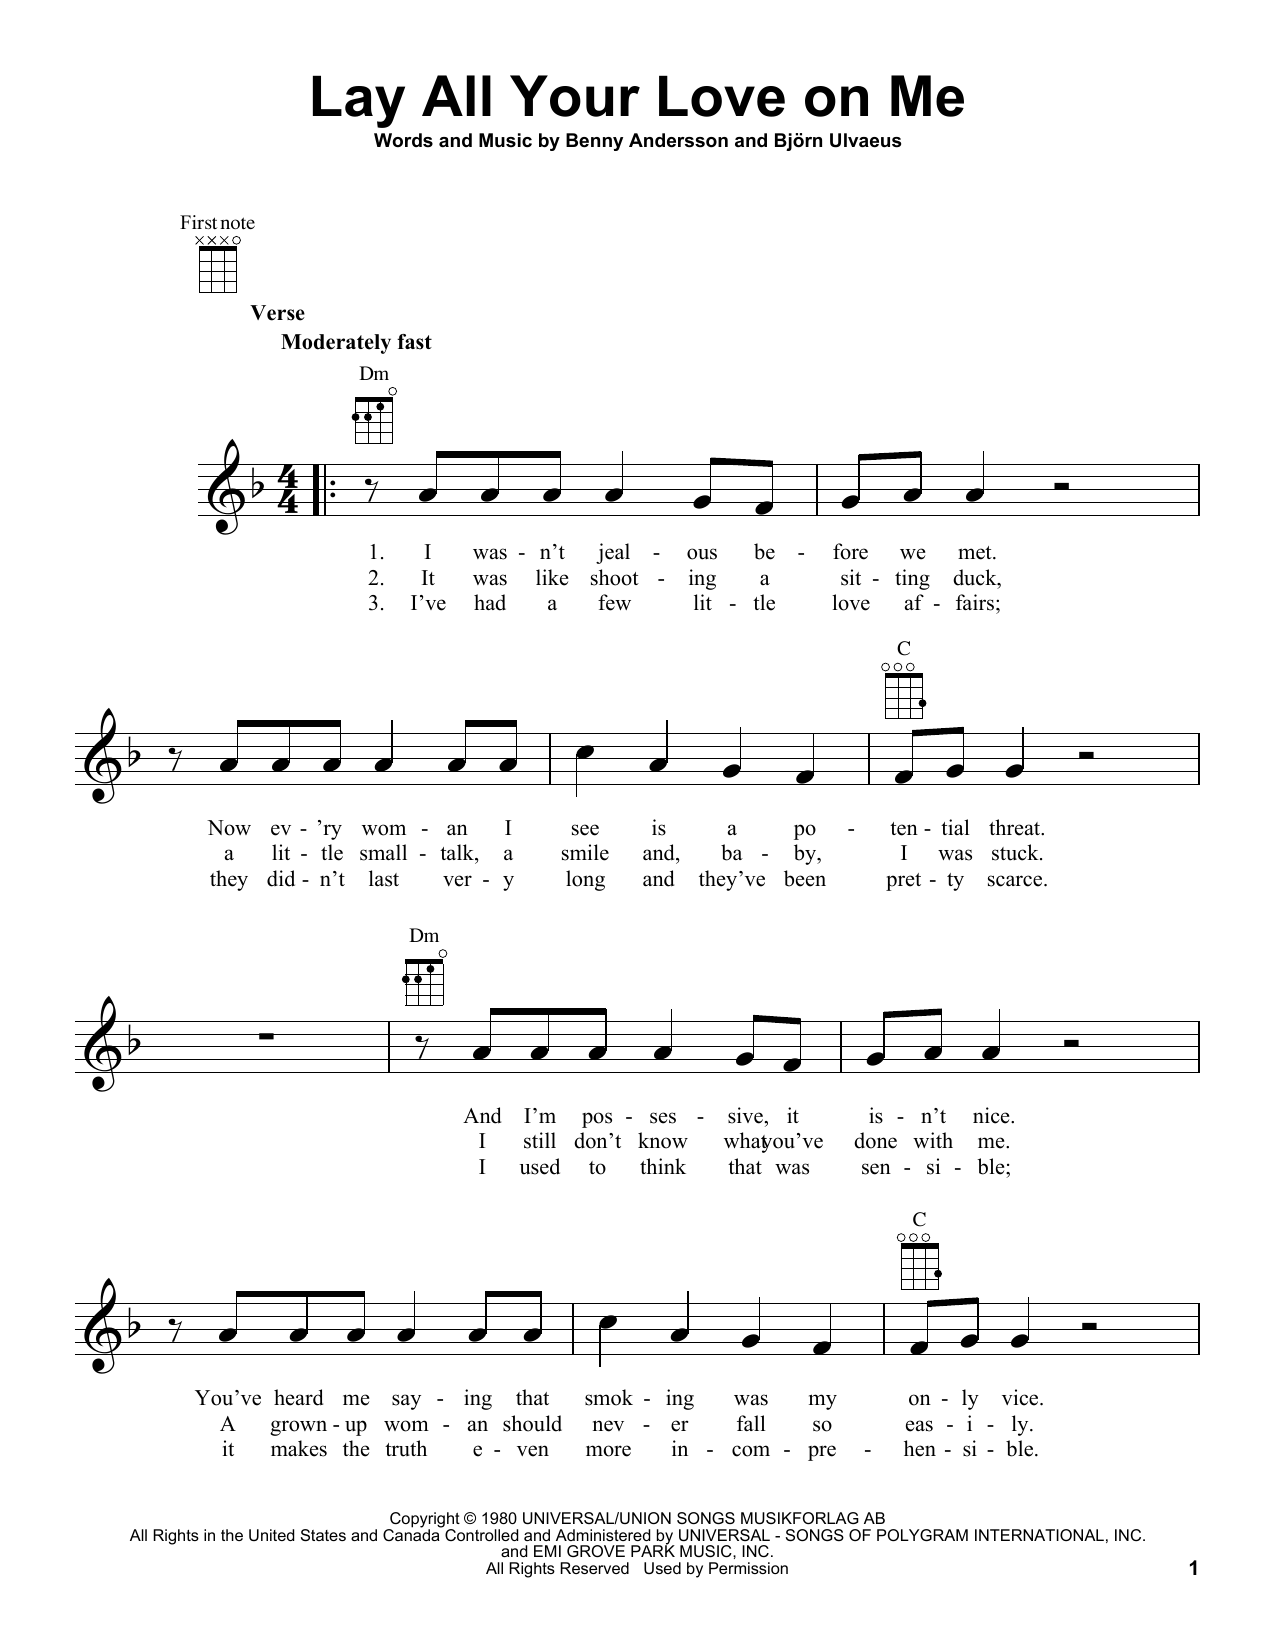 Download ABBA Lay All Your Love On Me Sheet Music